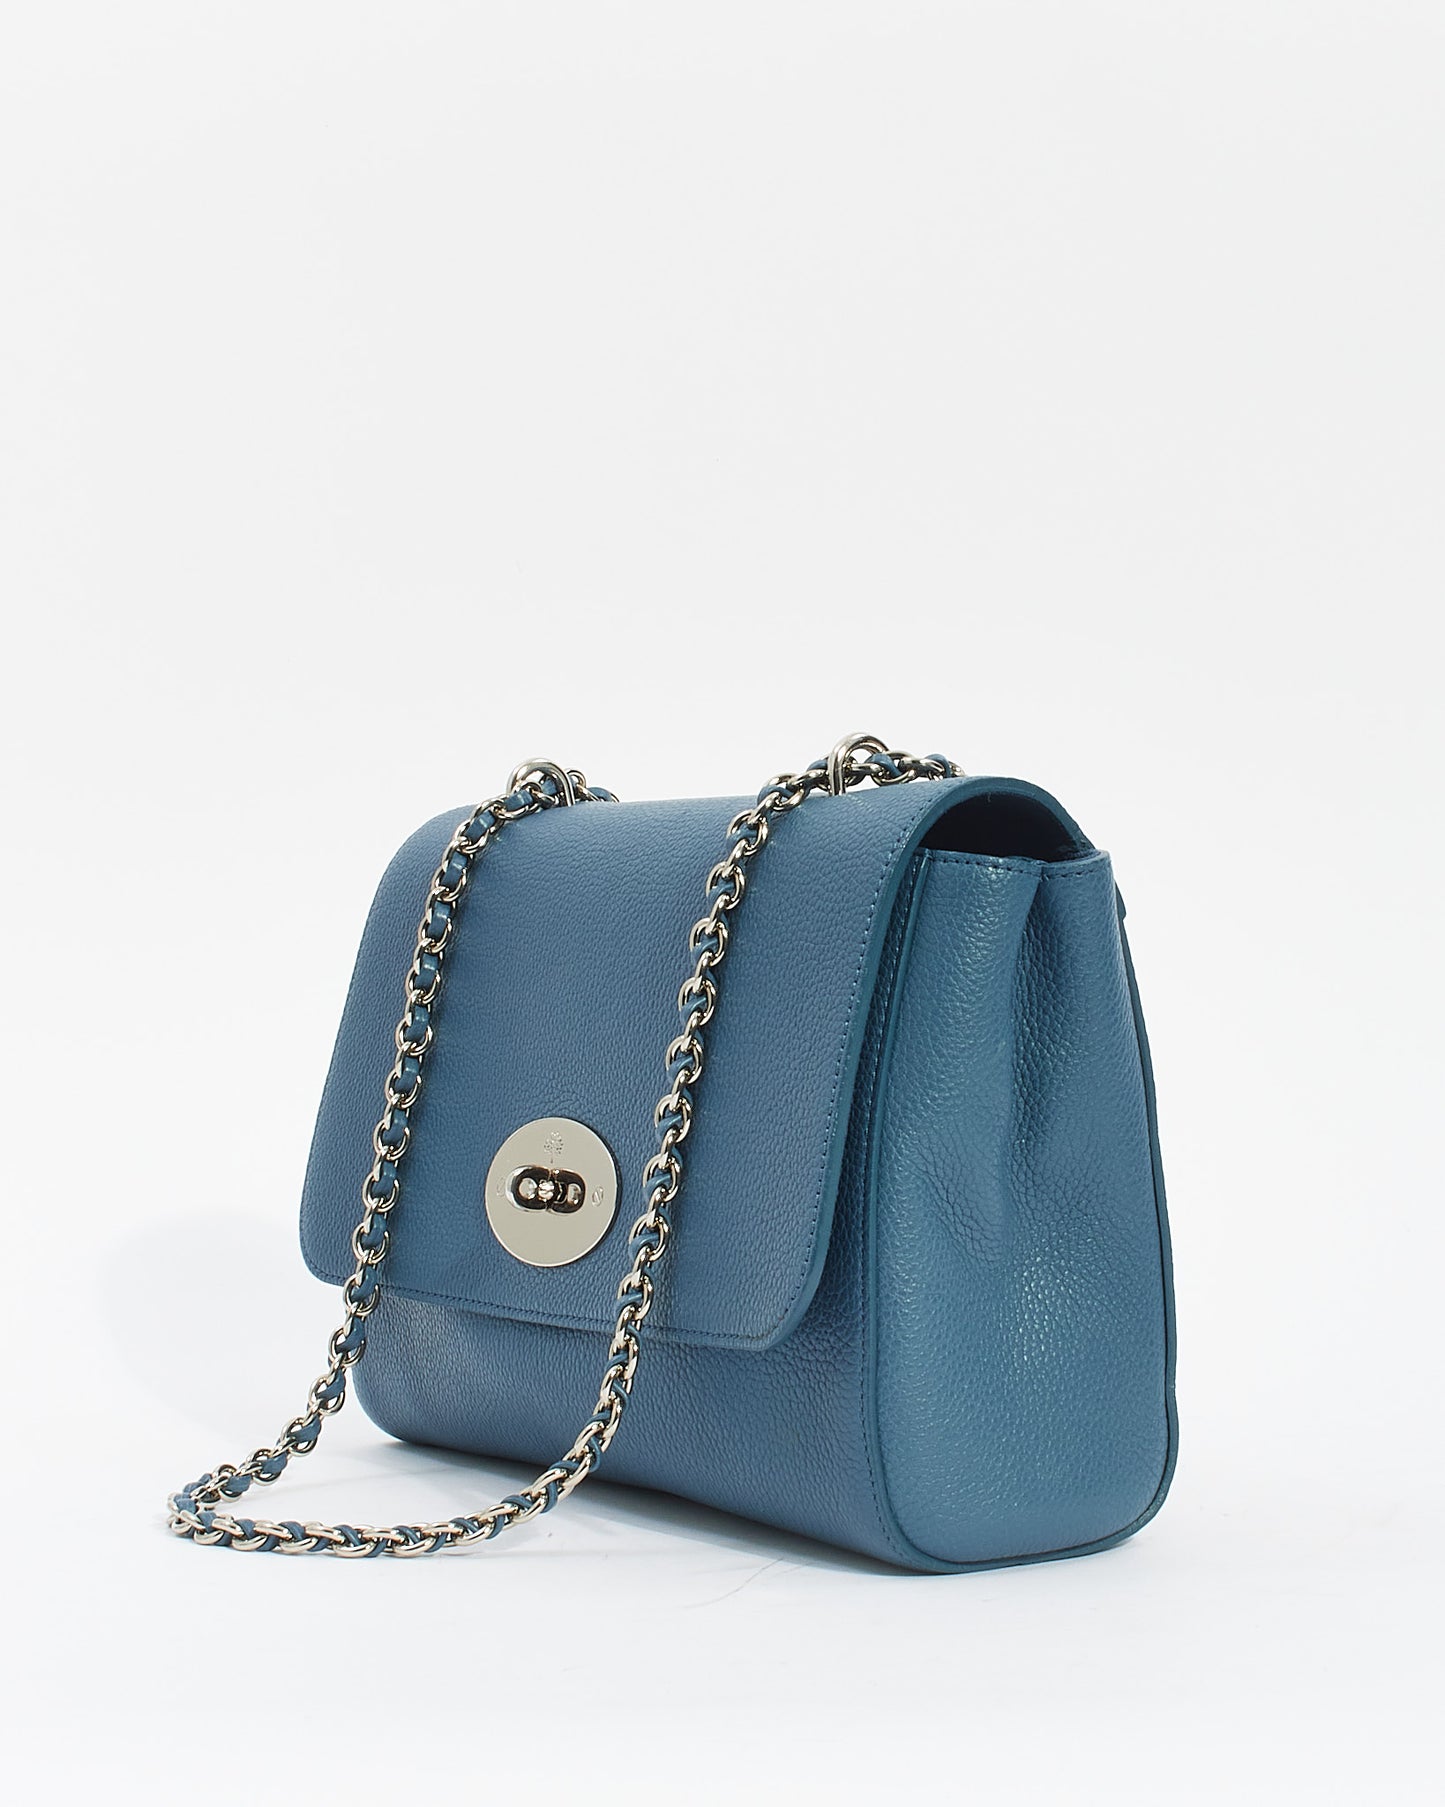 Mulberry Blue Leather Medium Lilly Bag